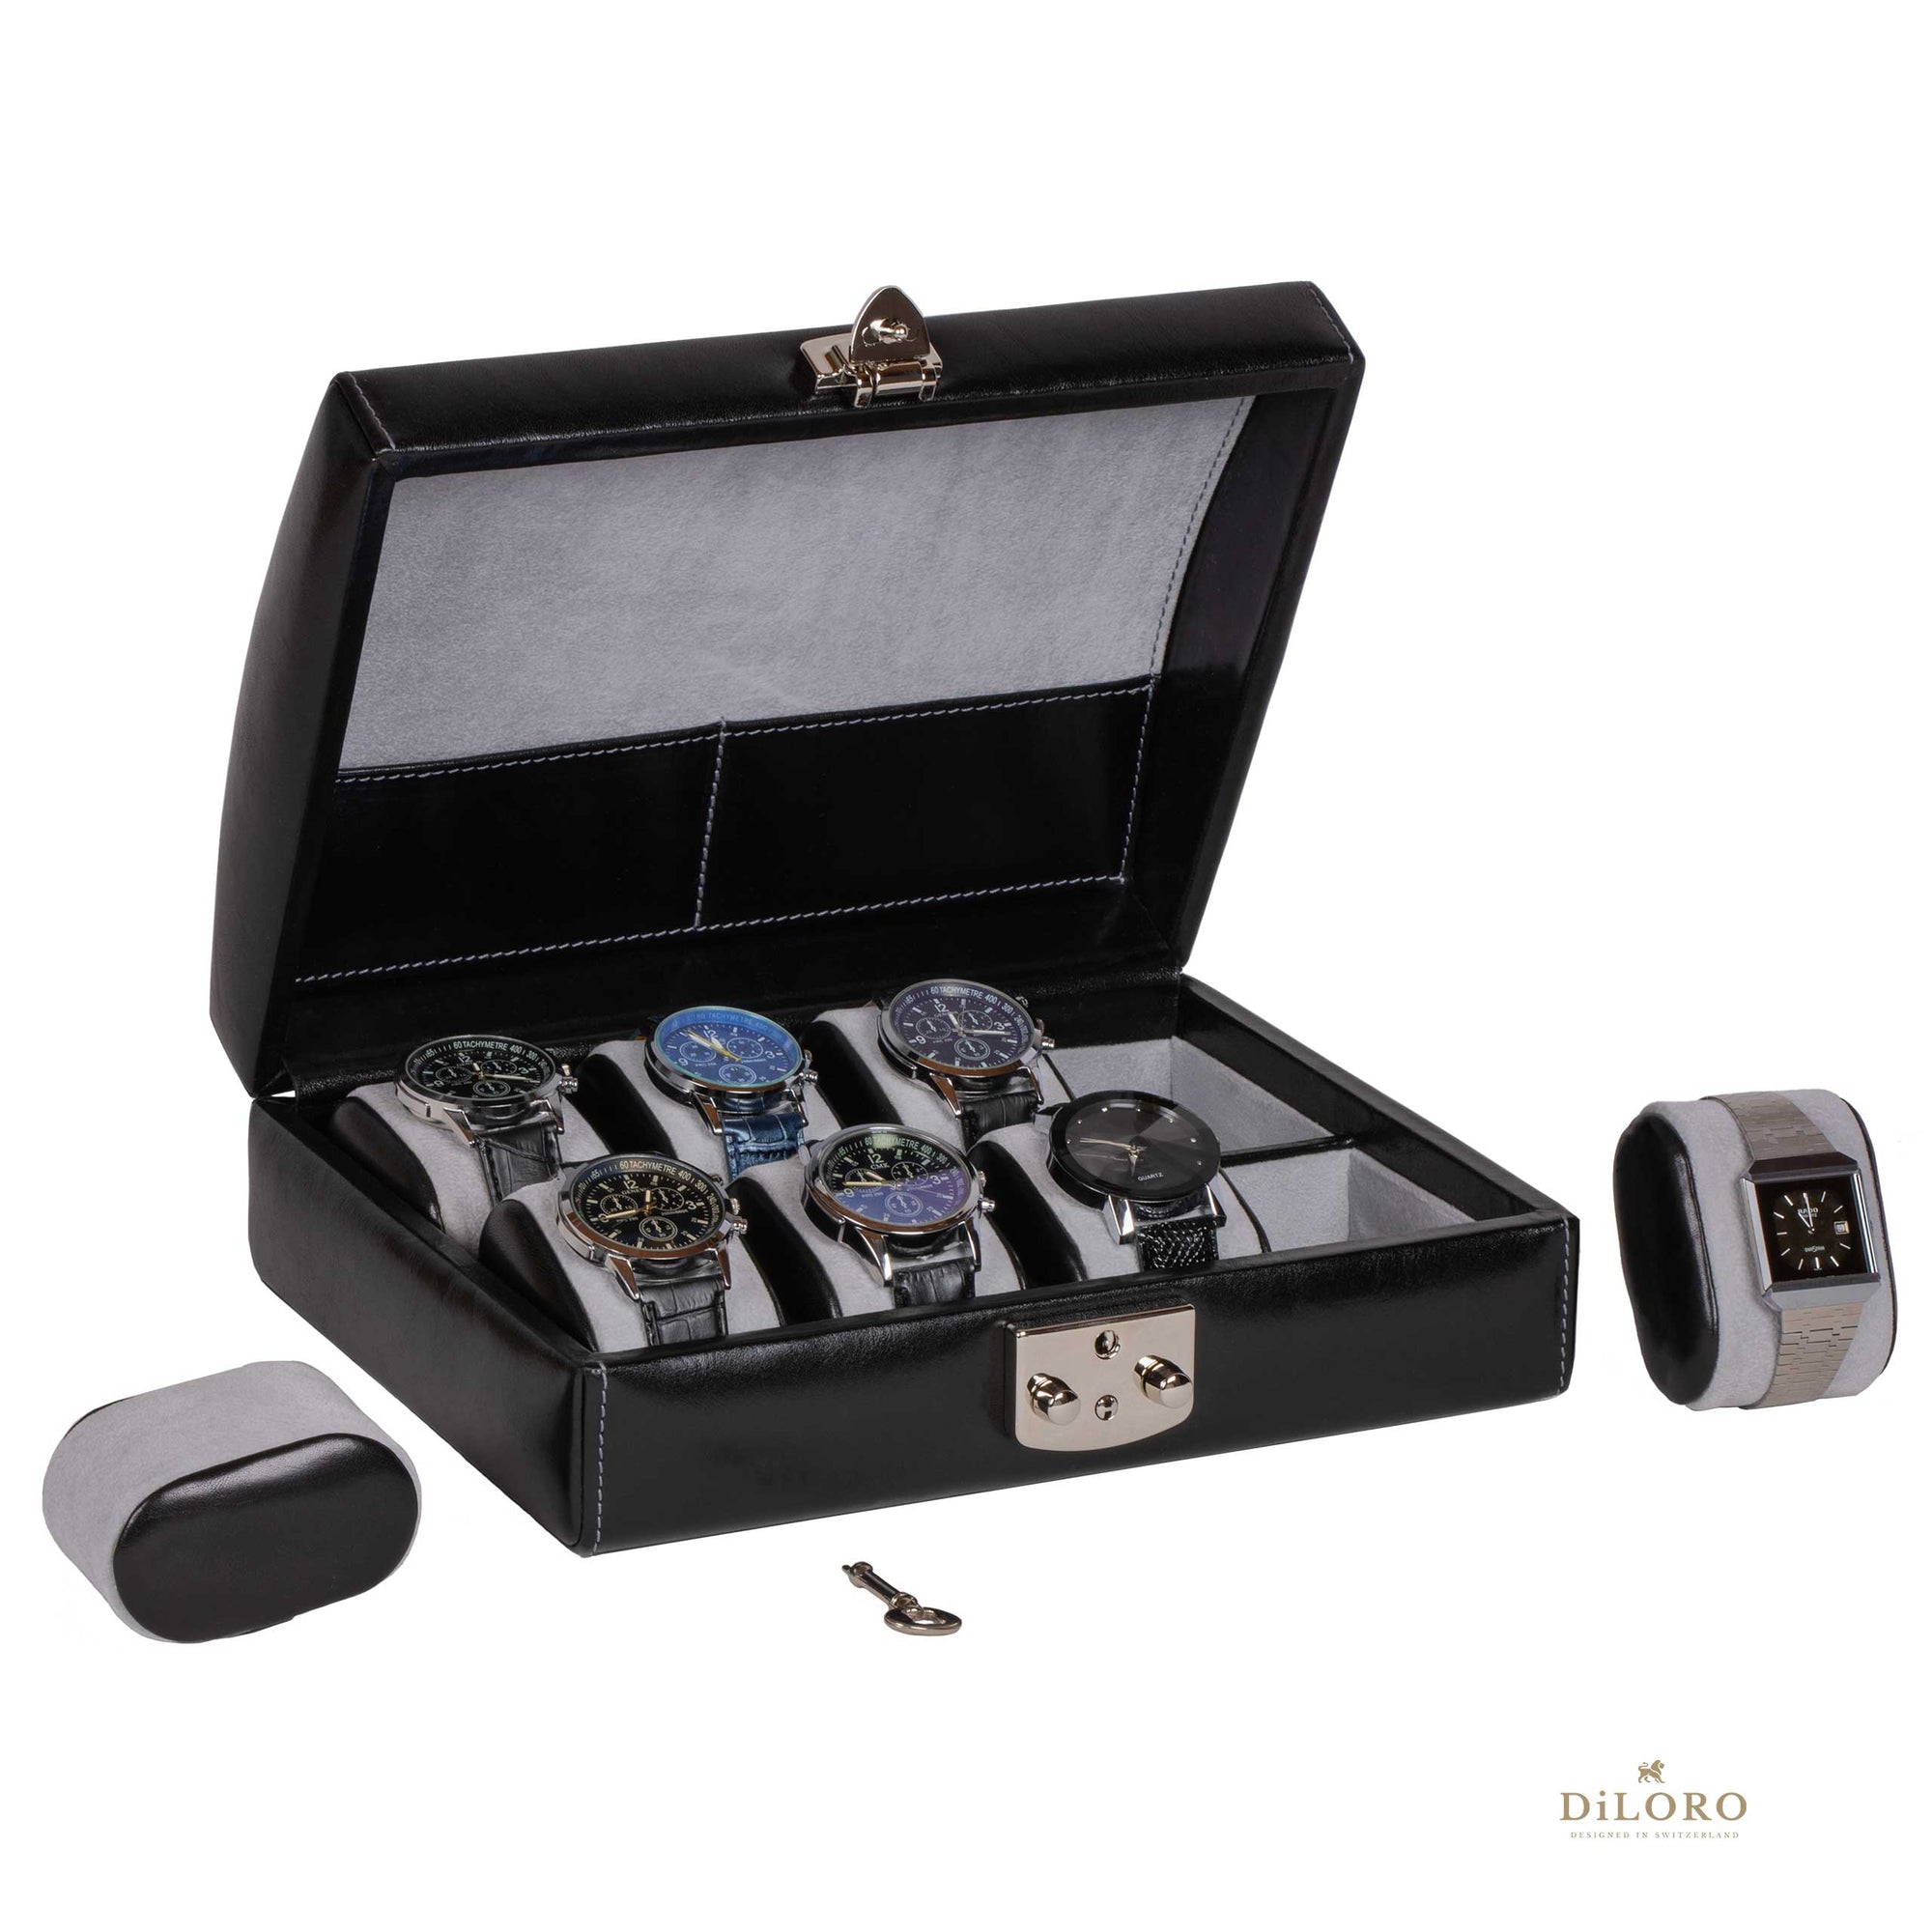 Petra Watch Case - Togo Dark Blue for 8 Watches for Eight Watches